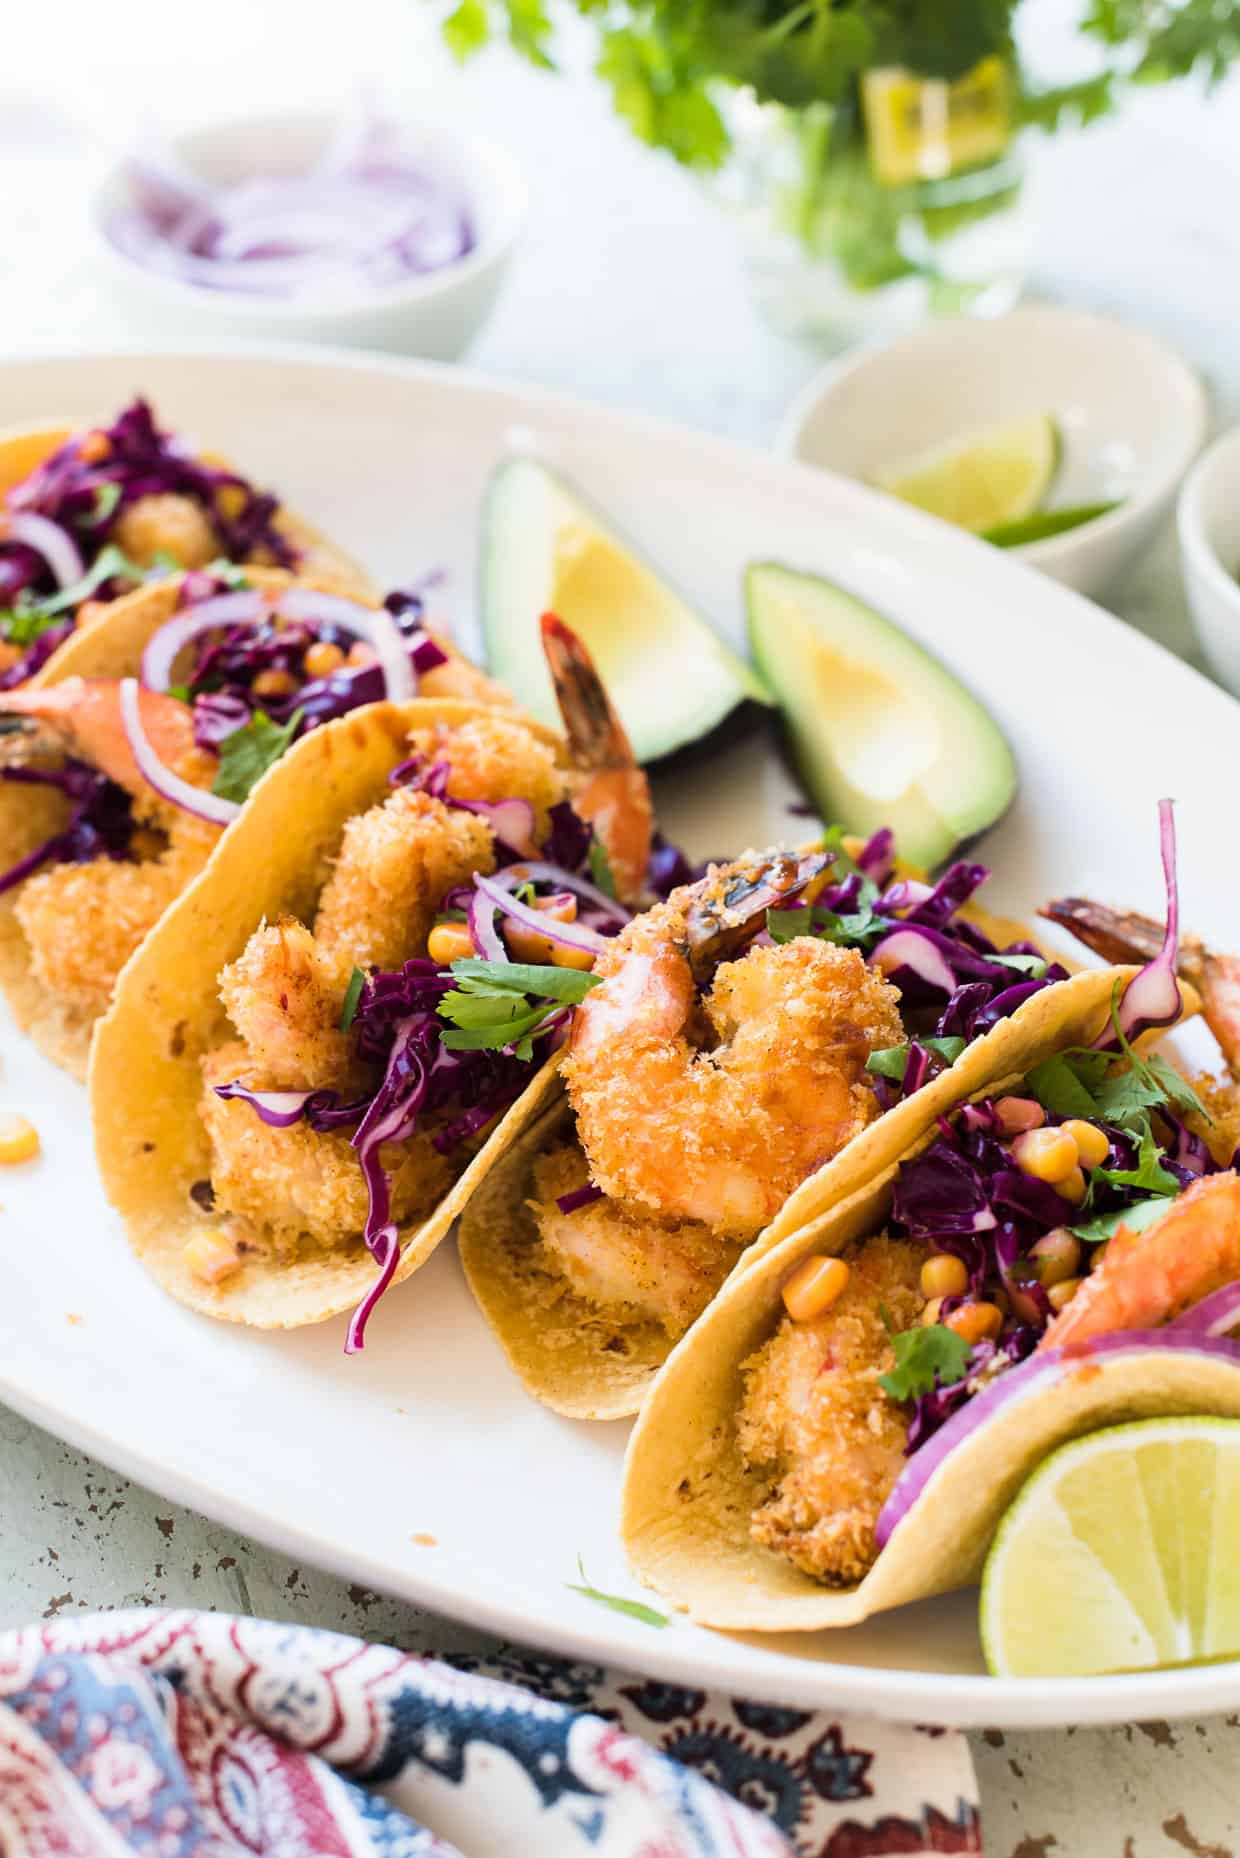 Tacos with oven-fried crispy shrimp, red cabbage and corn